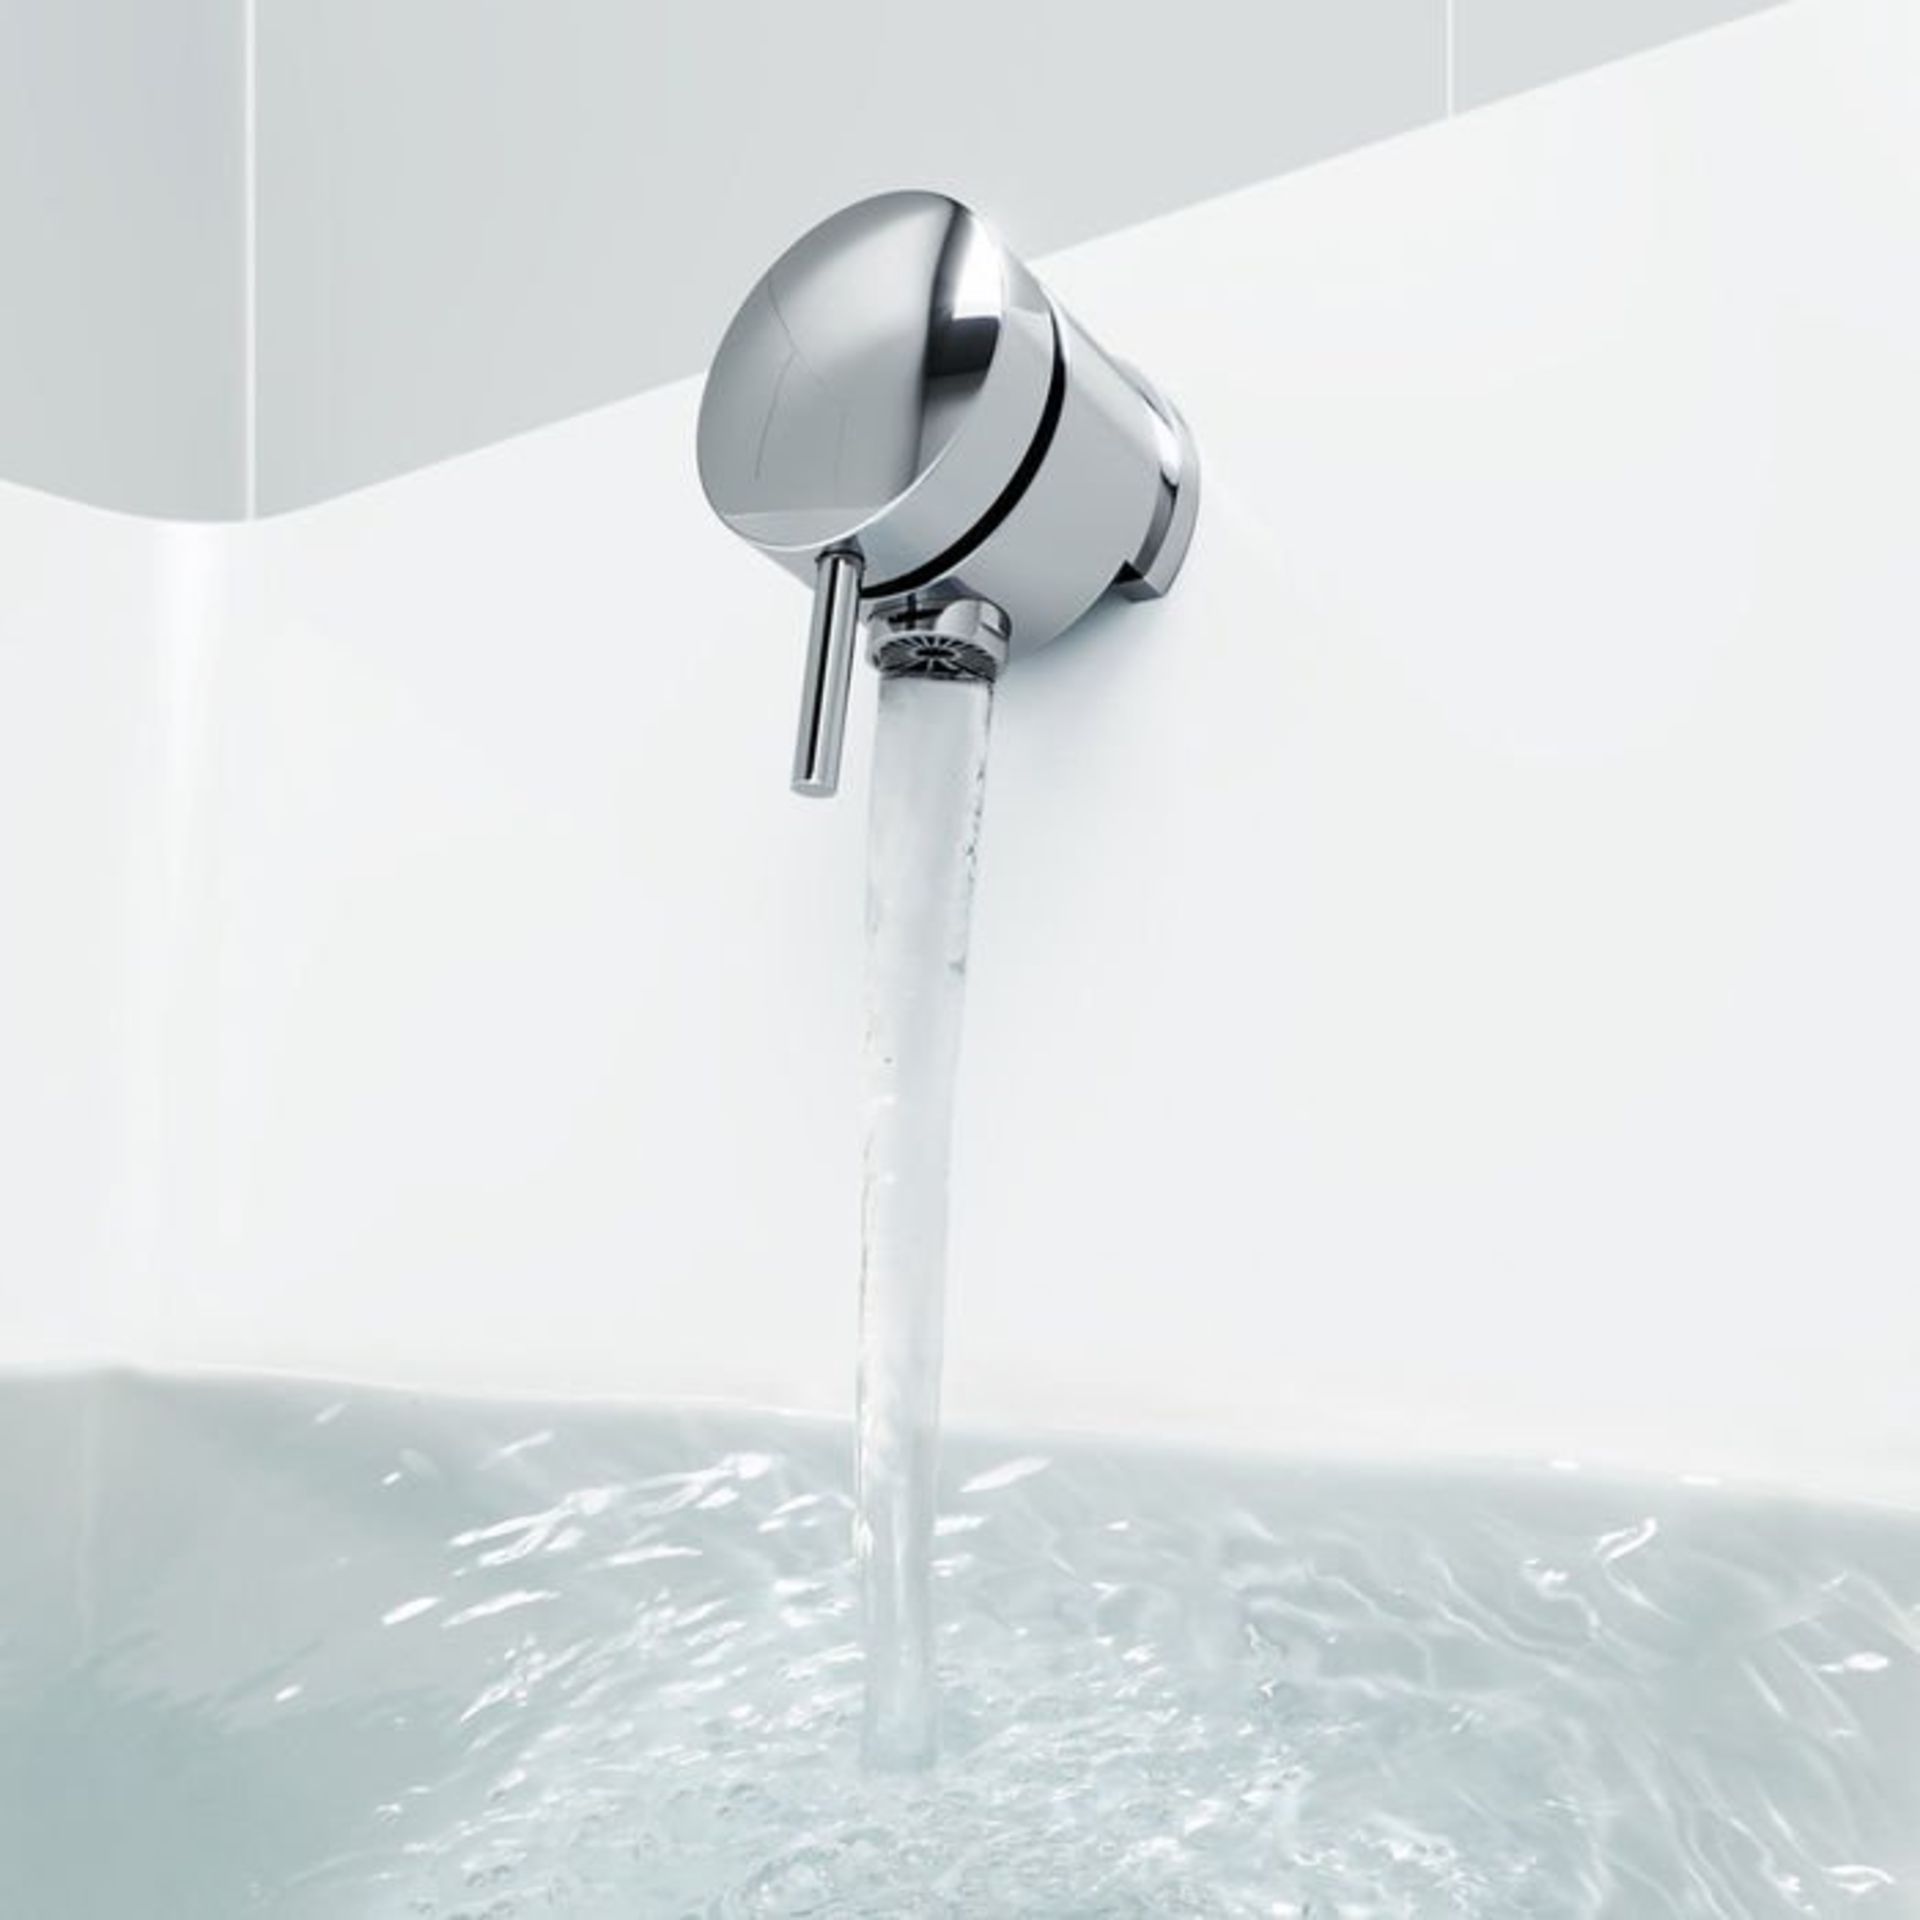 (S107) Bath Filler Waste Overflow Kit - Pop-Up RRP £74.99 Made with zinc with solid brass components